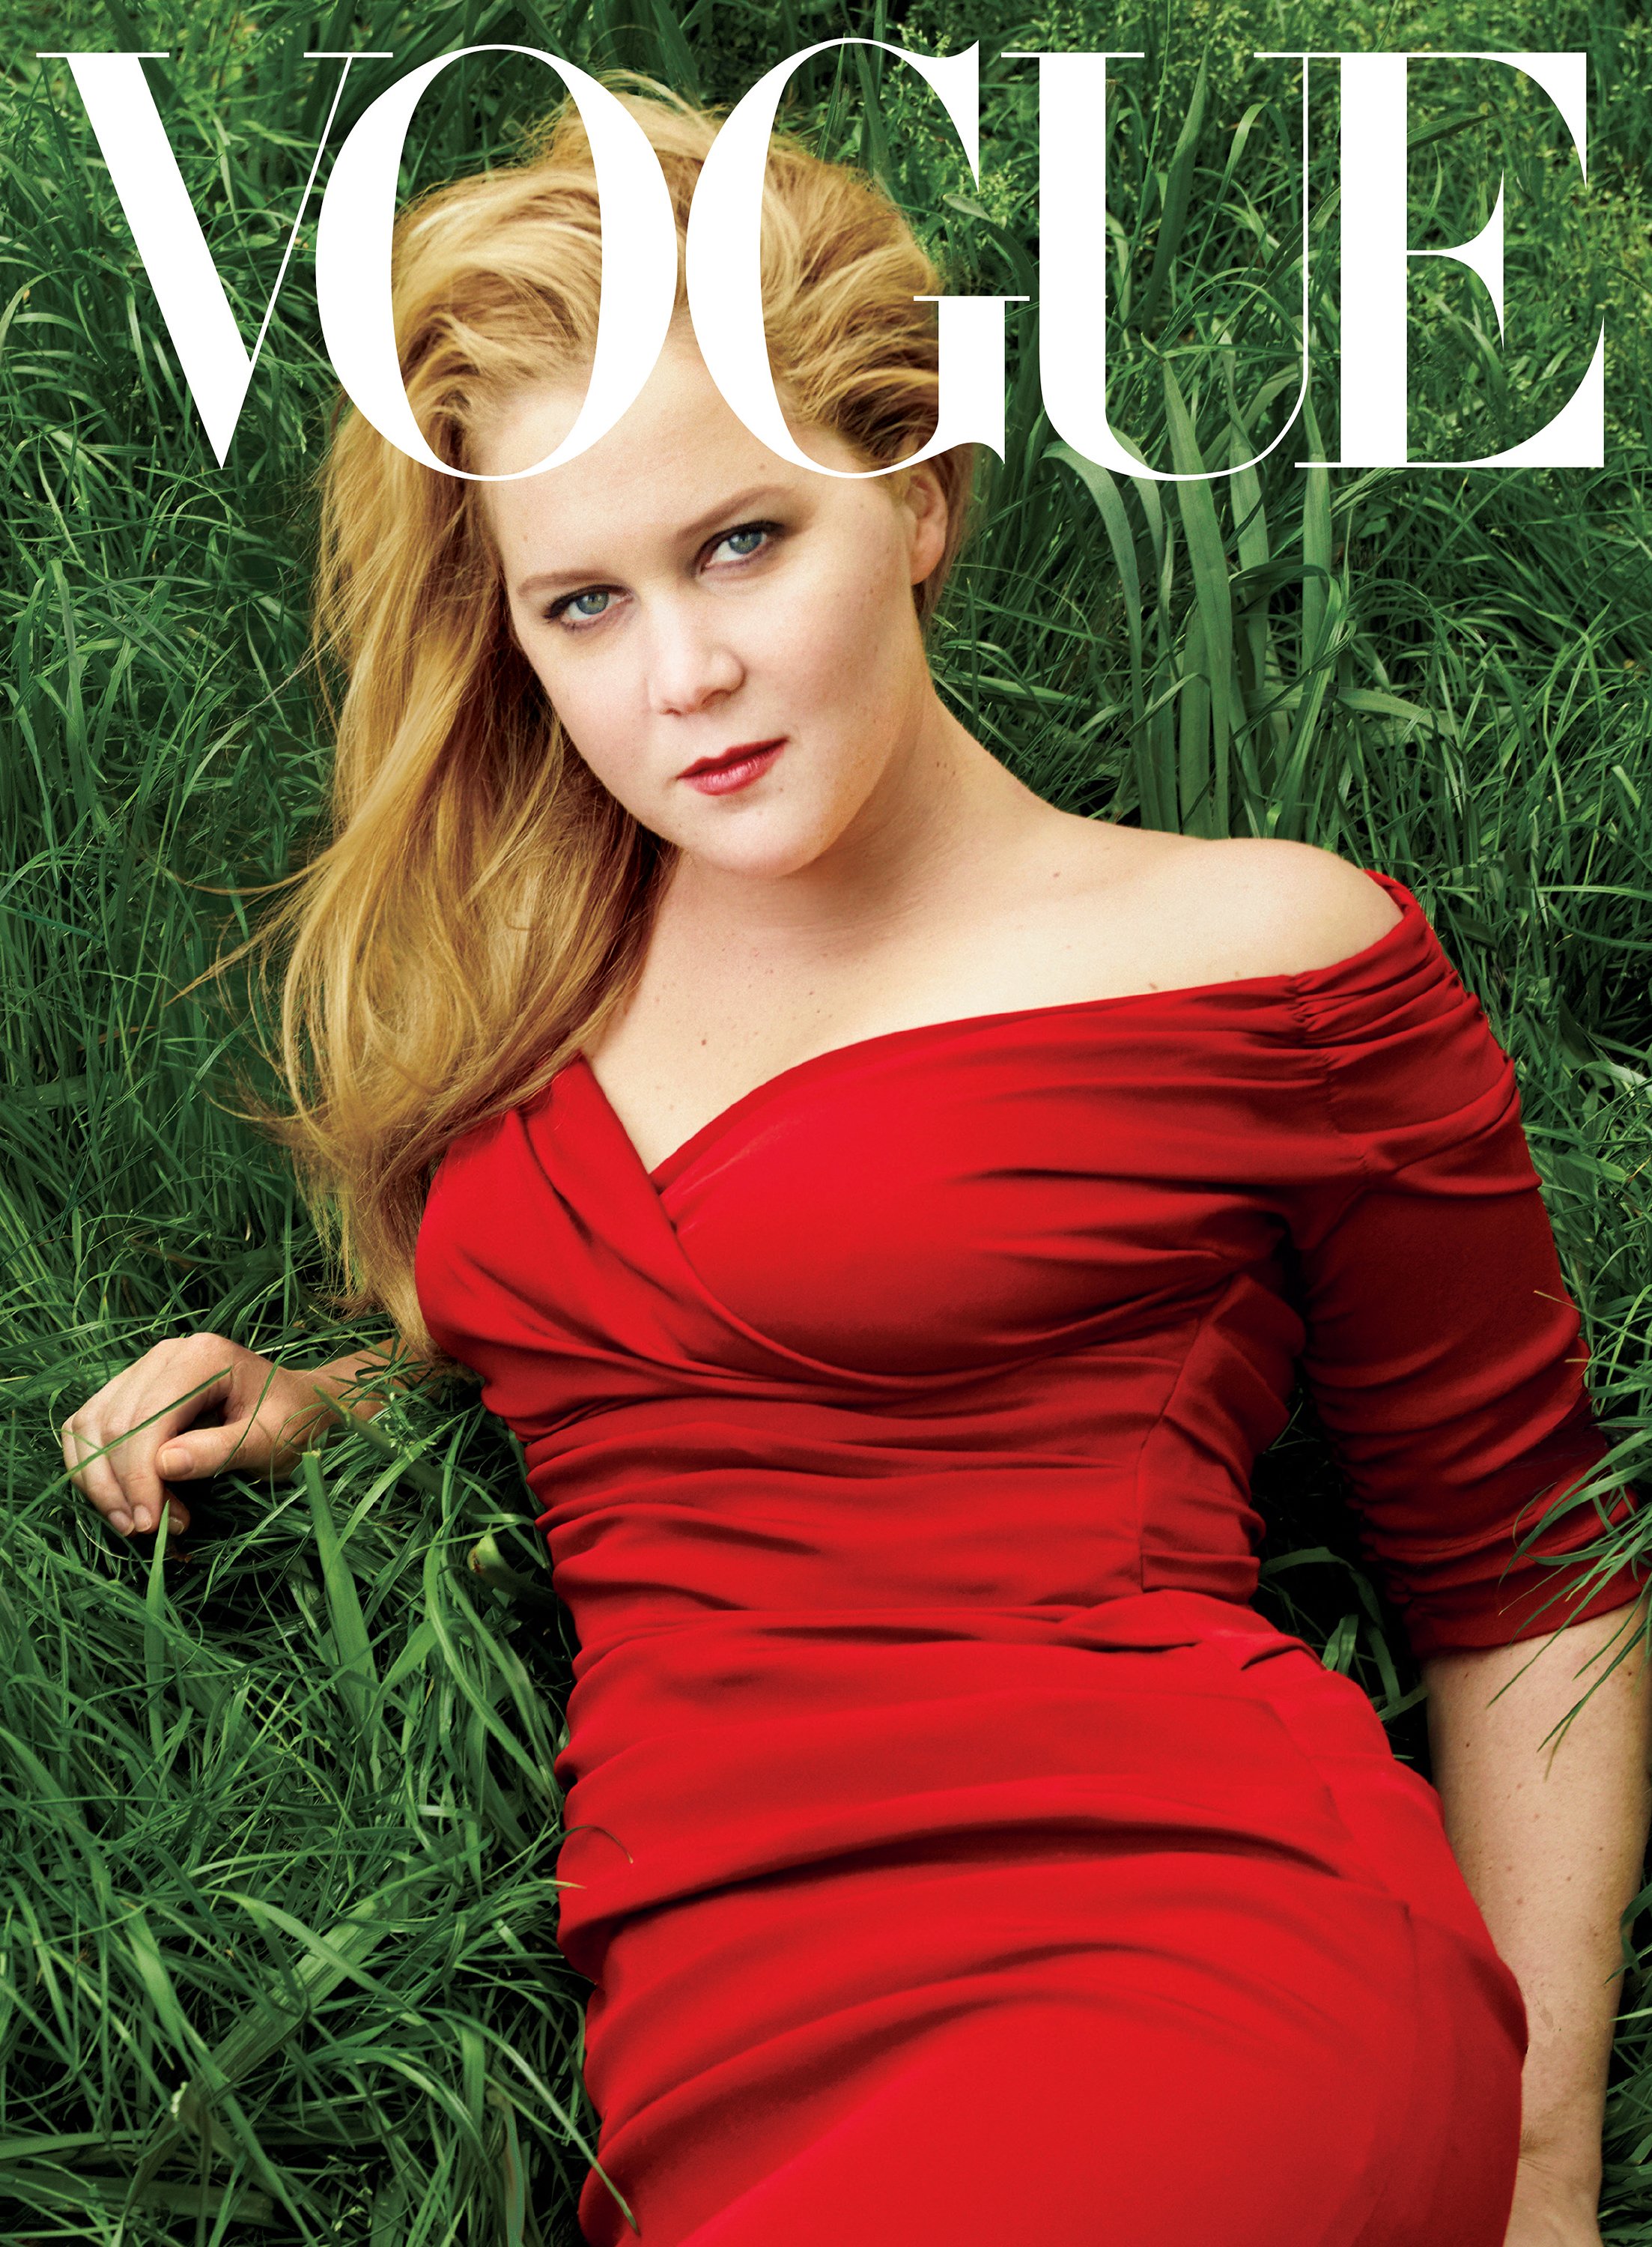 amy-schumer-vogue-july-2016-cover-holding